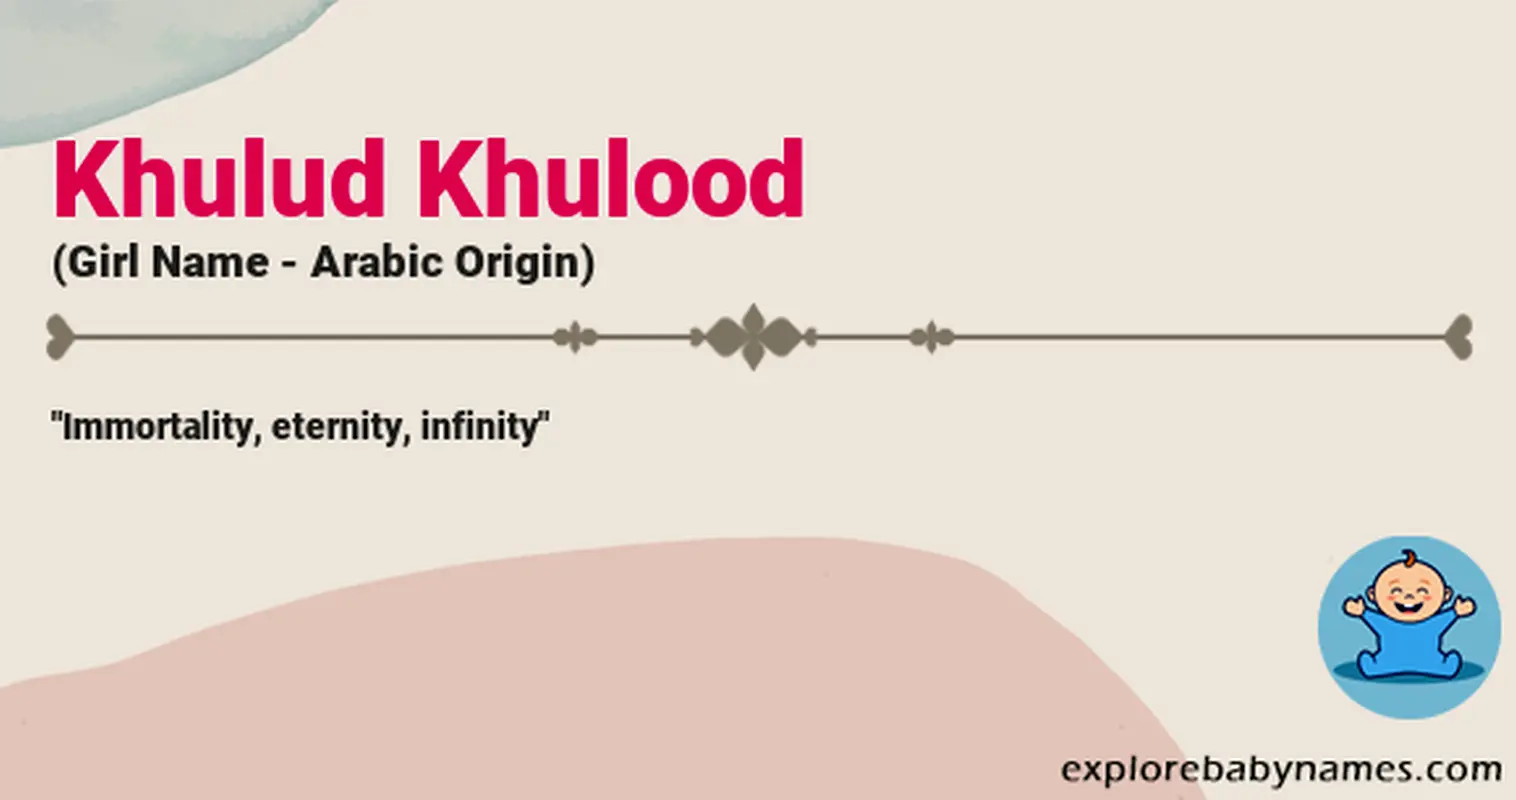 Meaning of Khulud Khulood